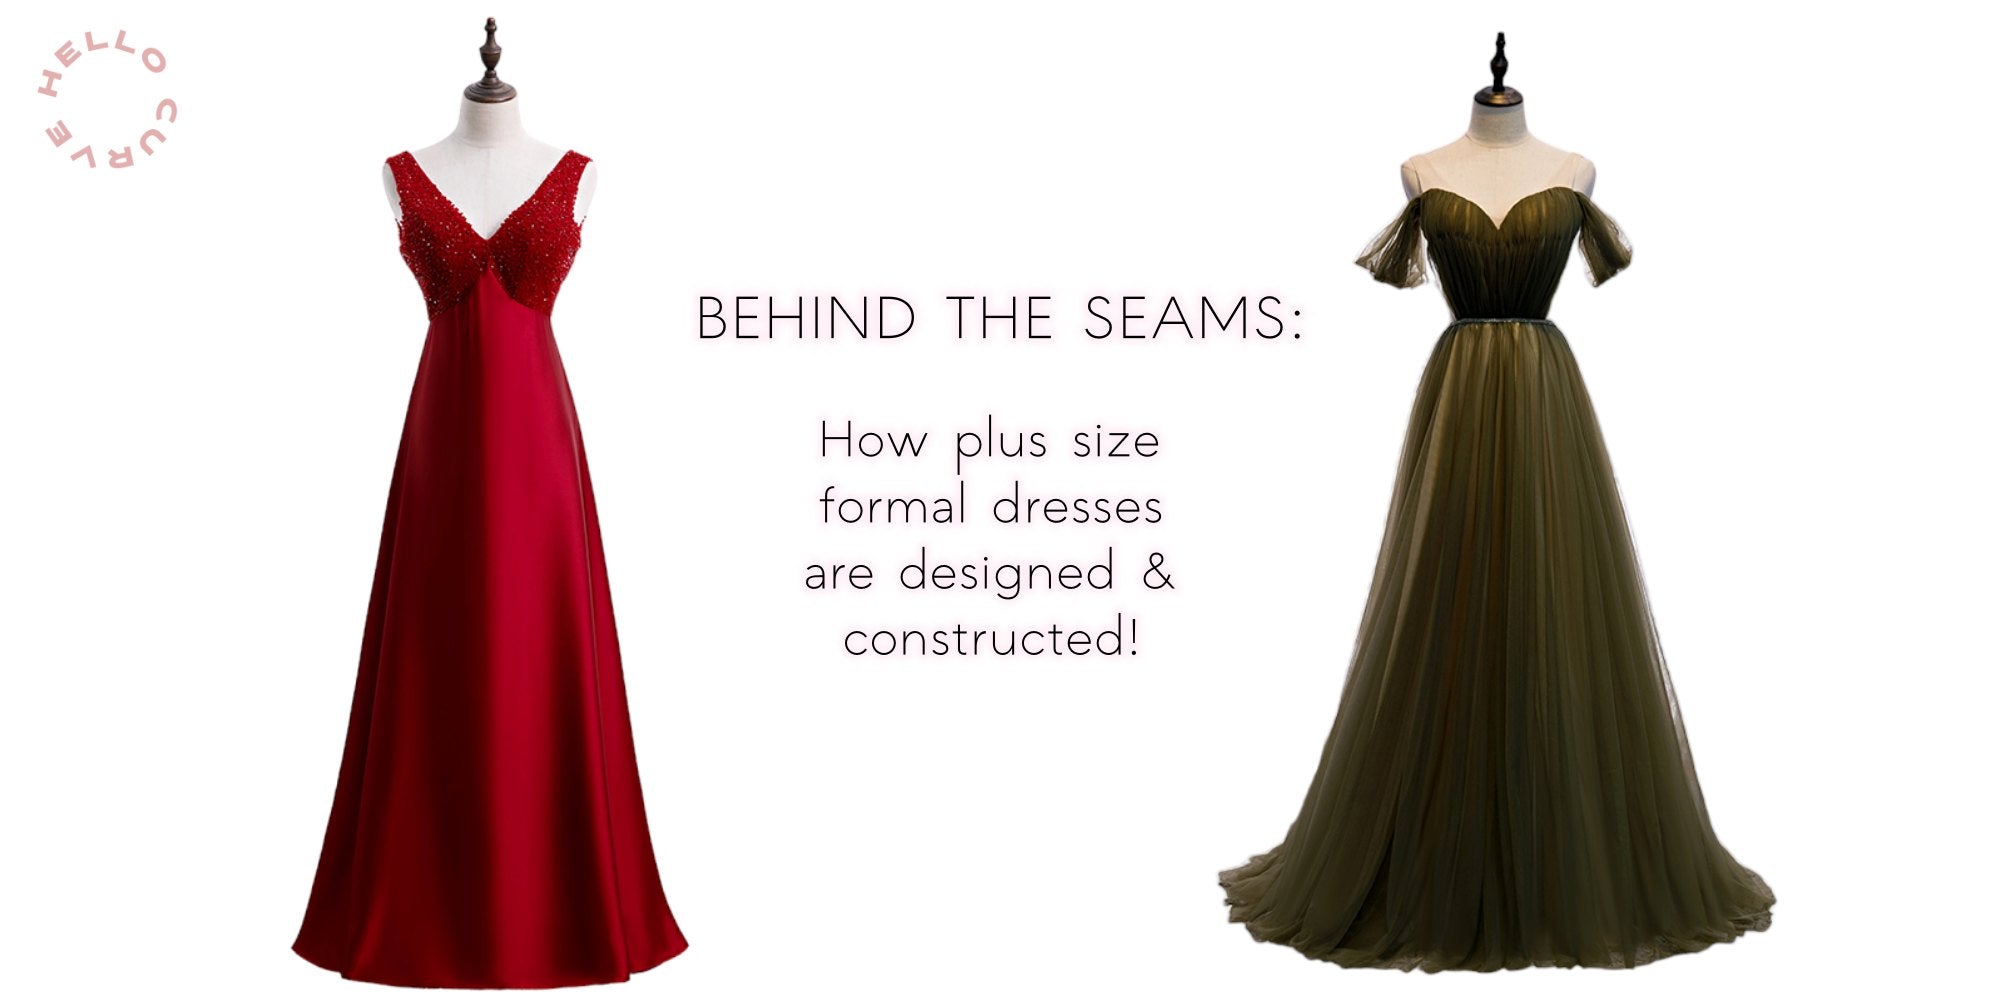 Behind the Scene: How Plus Size Formal Dresses are Designed and Constructed